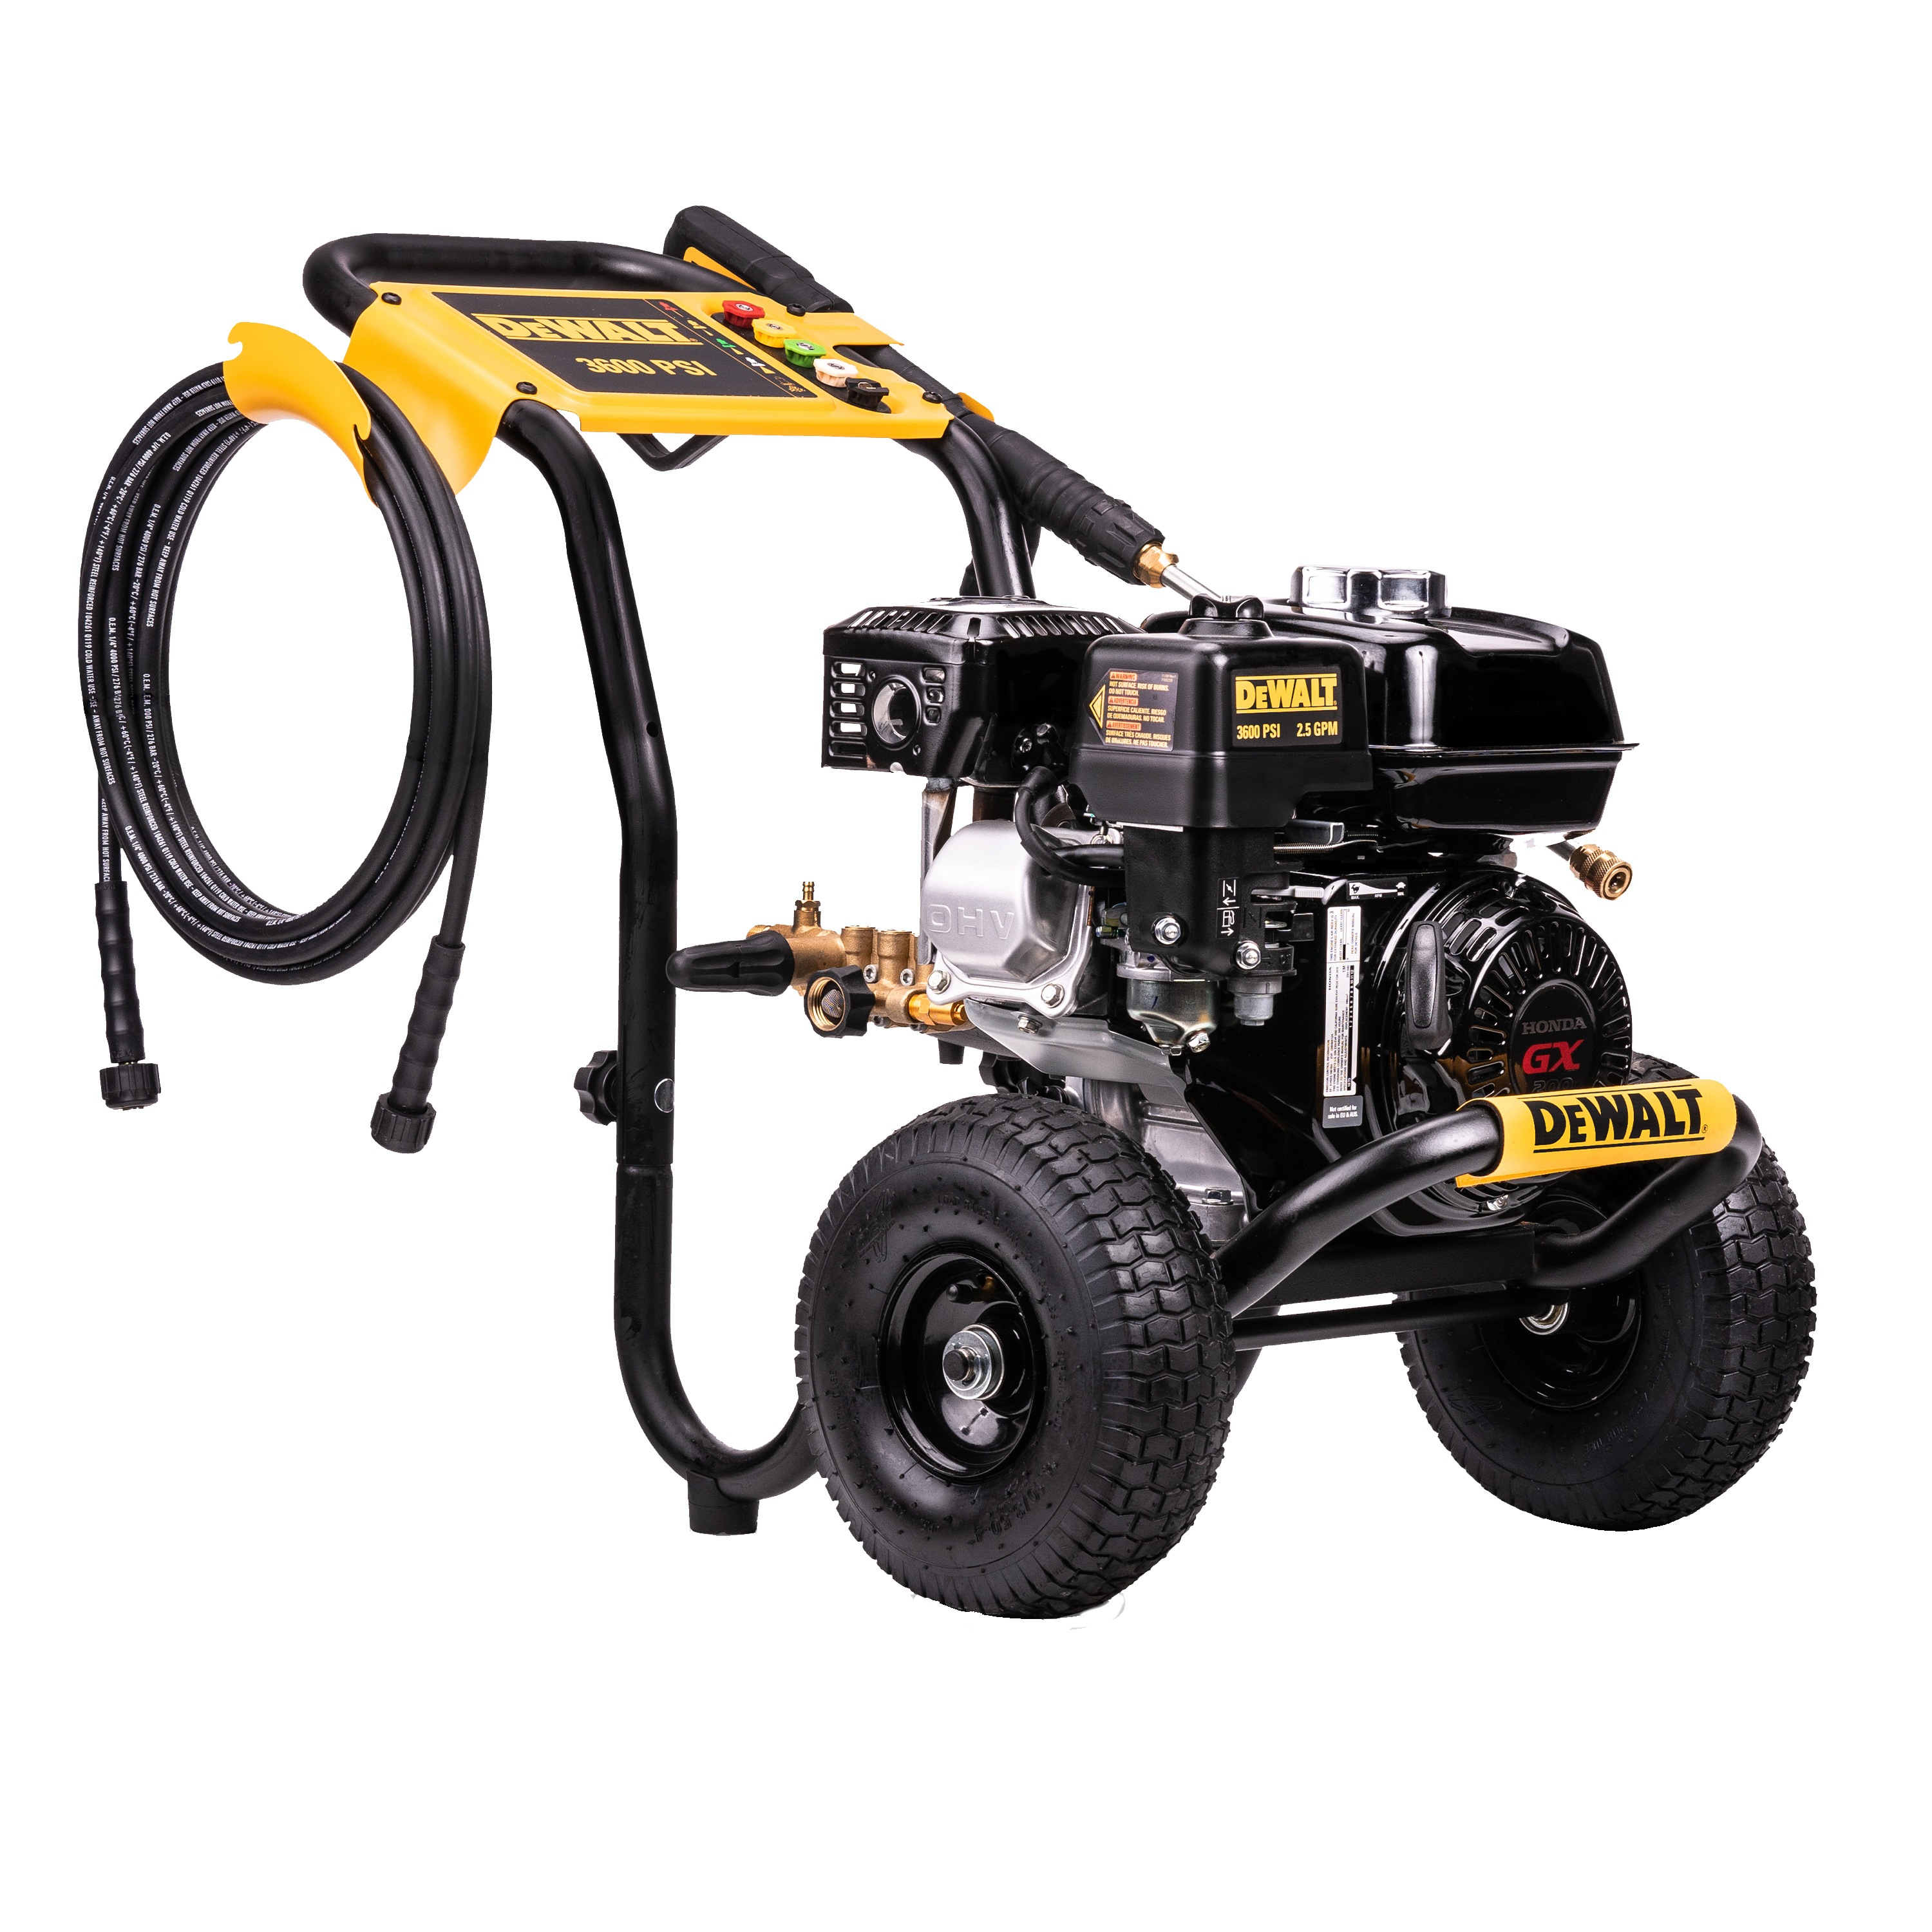 DEWALT - 3600 PSI at 25 GPM Cold Water Gas Pressure Washer Powered by Honda with Triplex Pump - DXPW3625